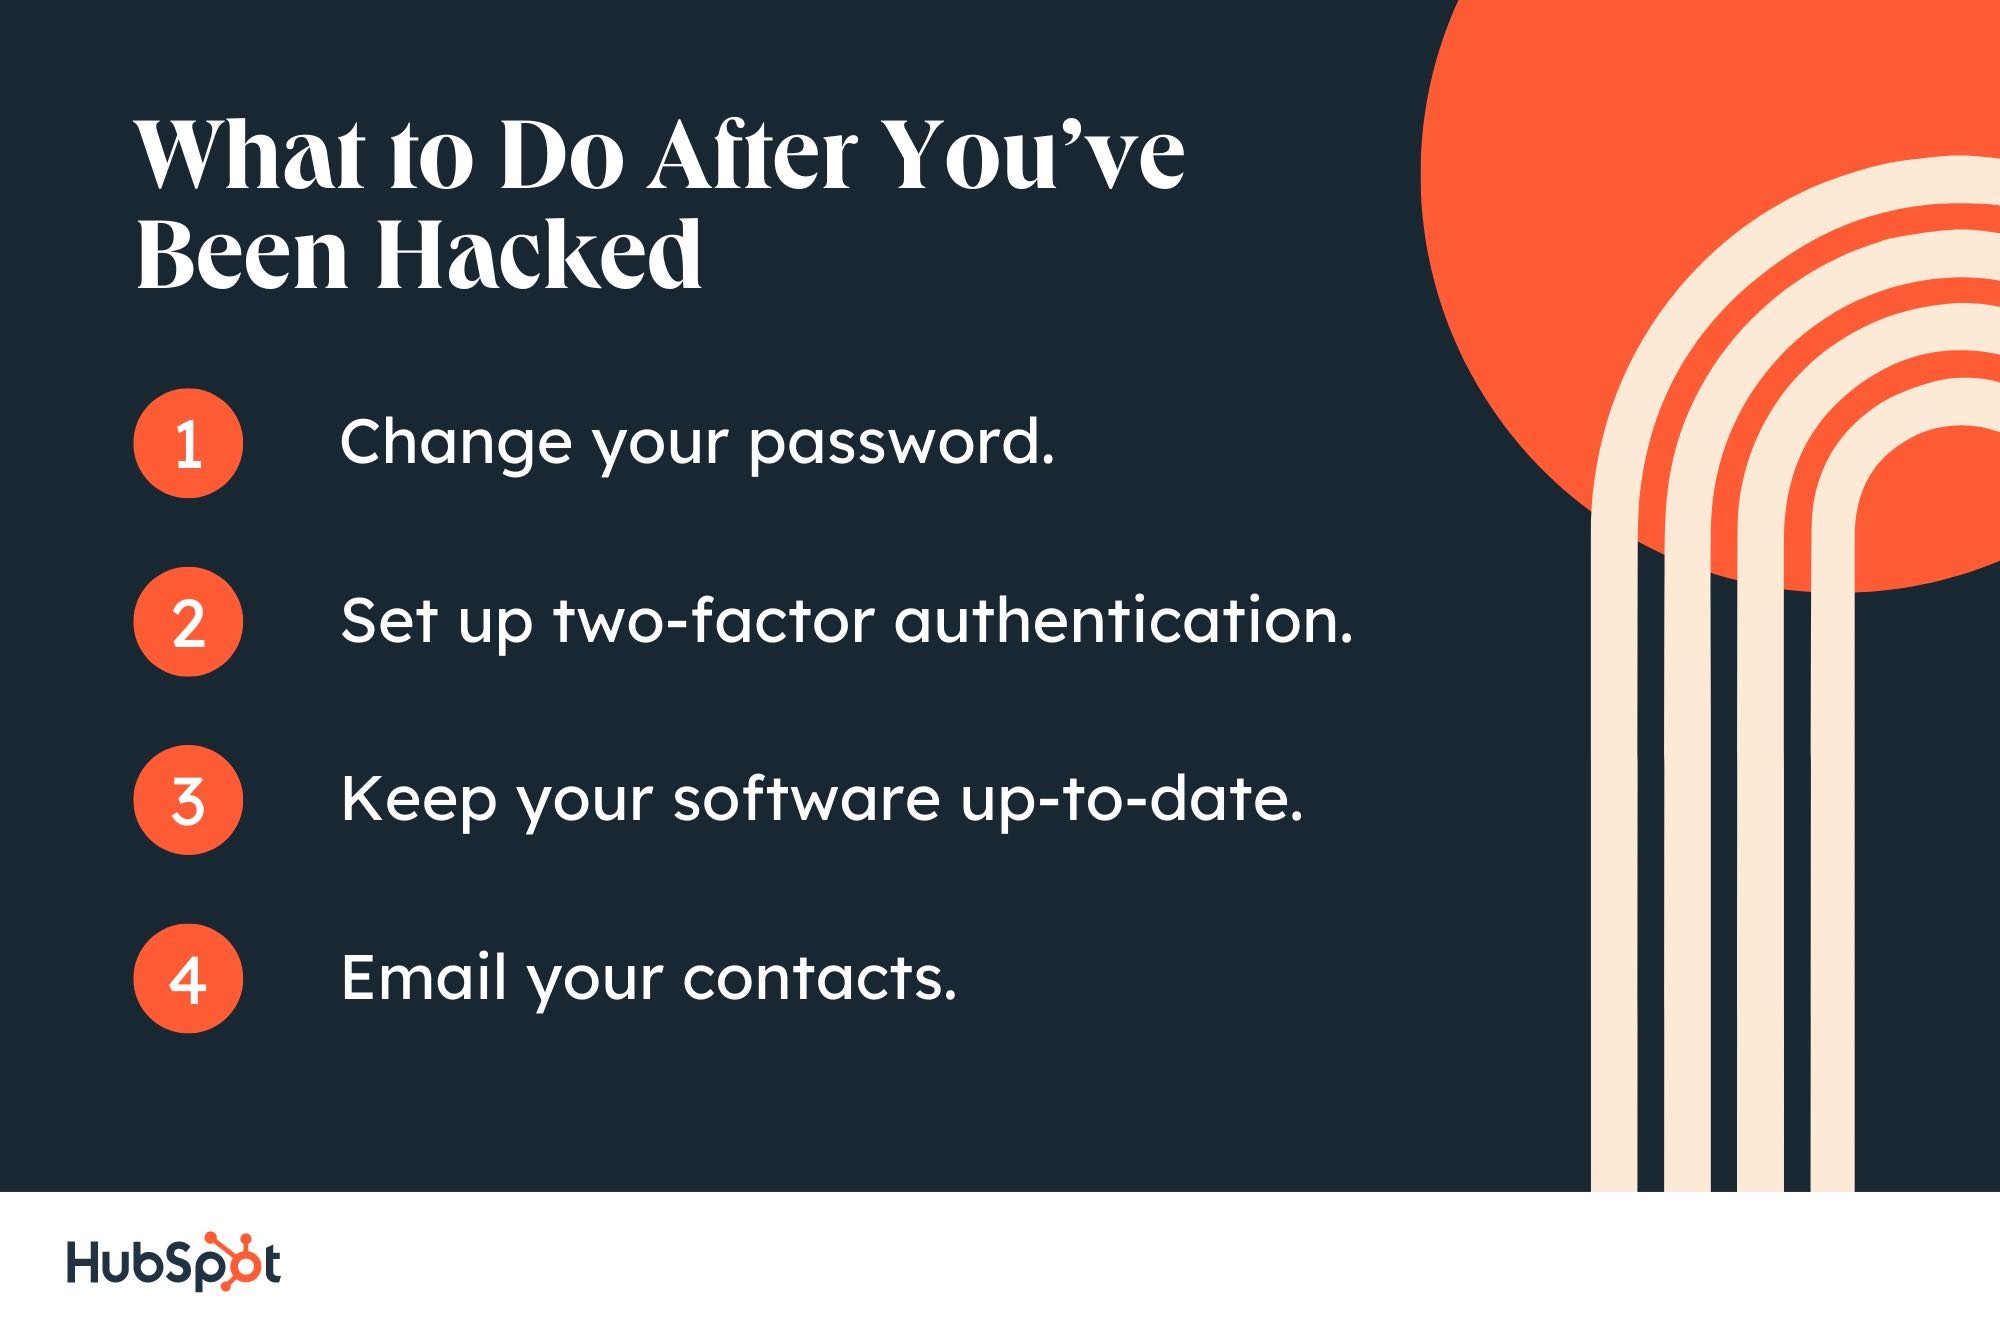 Hacked Email Next Steps: Change your password, set up two-factor authentication, keep your software up to date, and email your contacts.